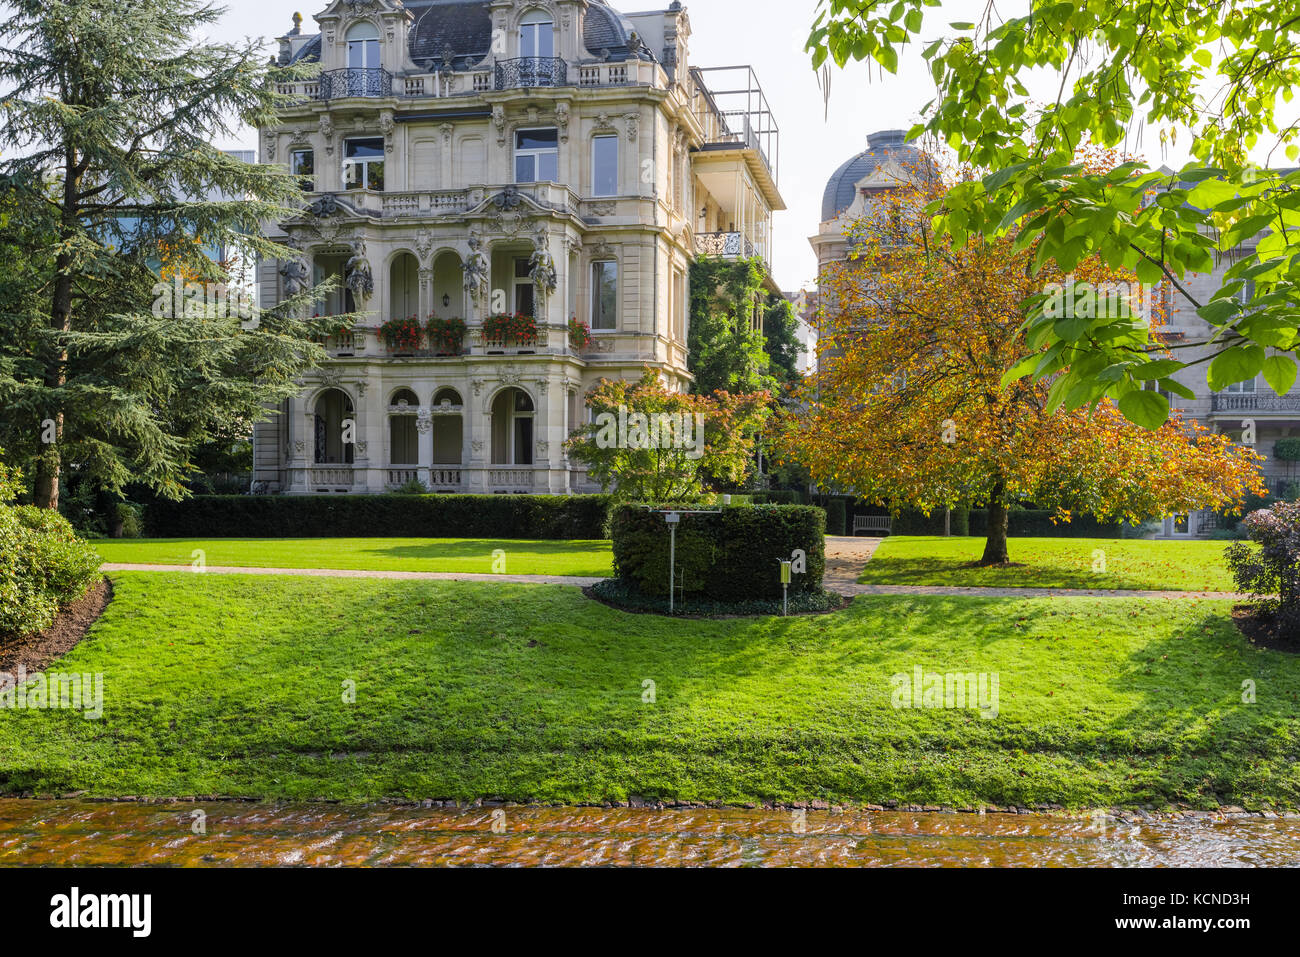 world famous hotel Brenners Parkhotel at the spa garden and arboretum at the Lichtentaler Allee in Baden-Baden, Black Forest, Germany Stock Photo